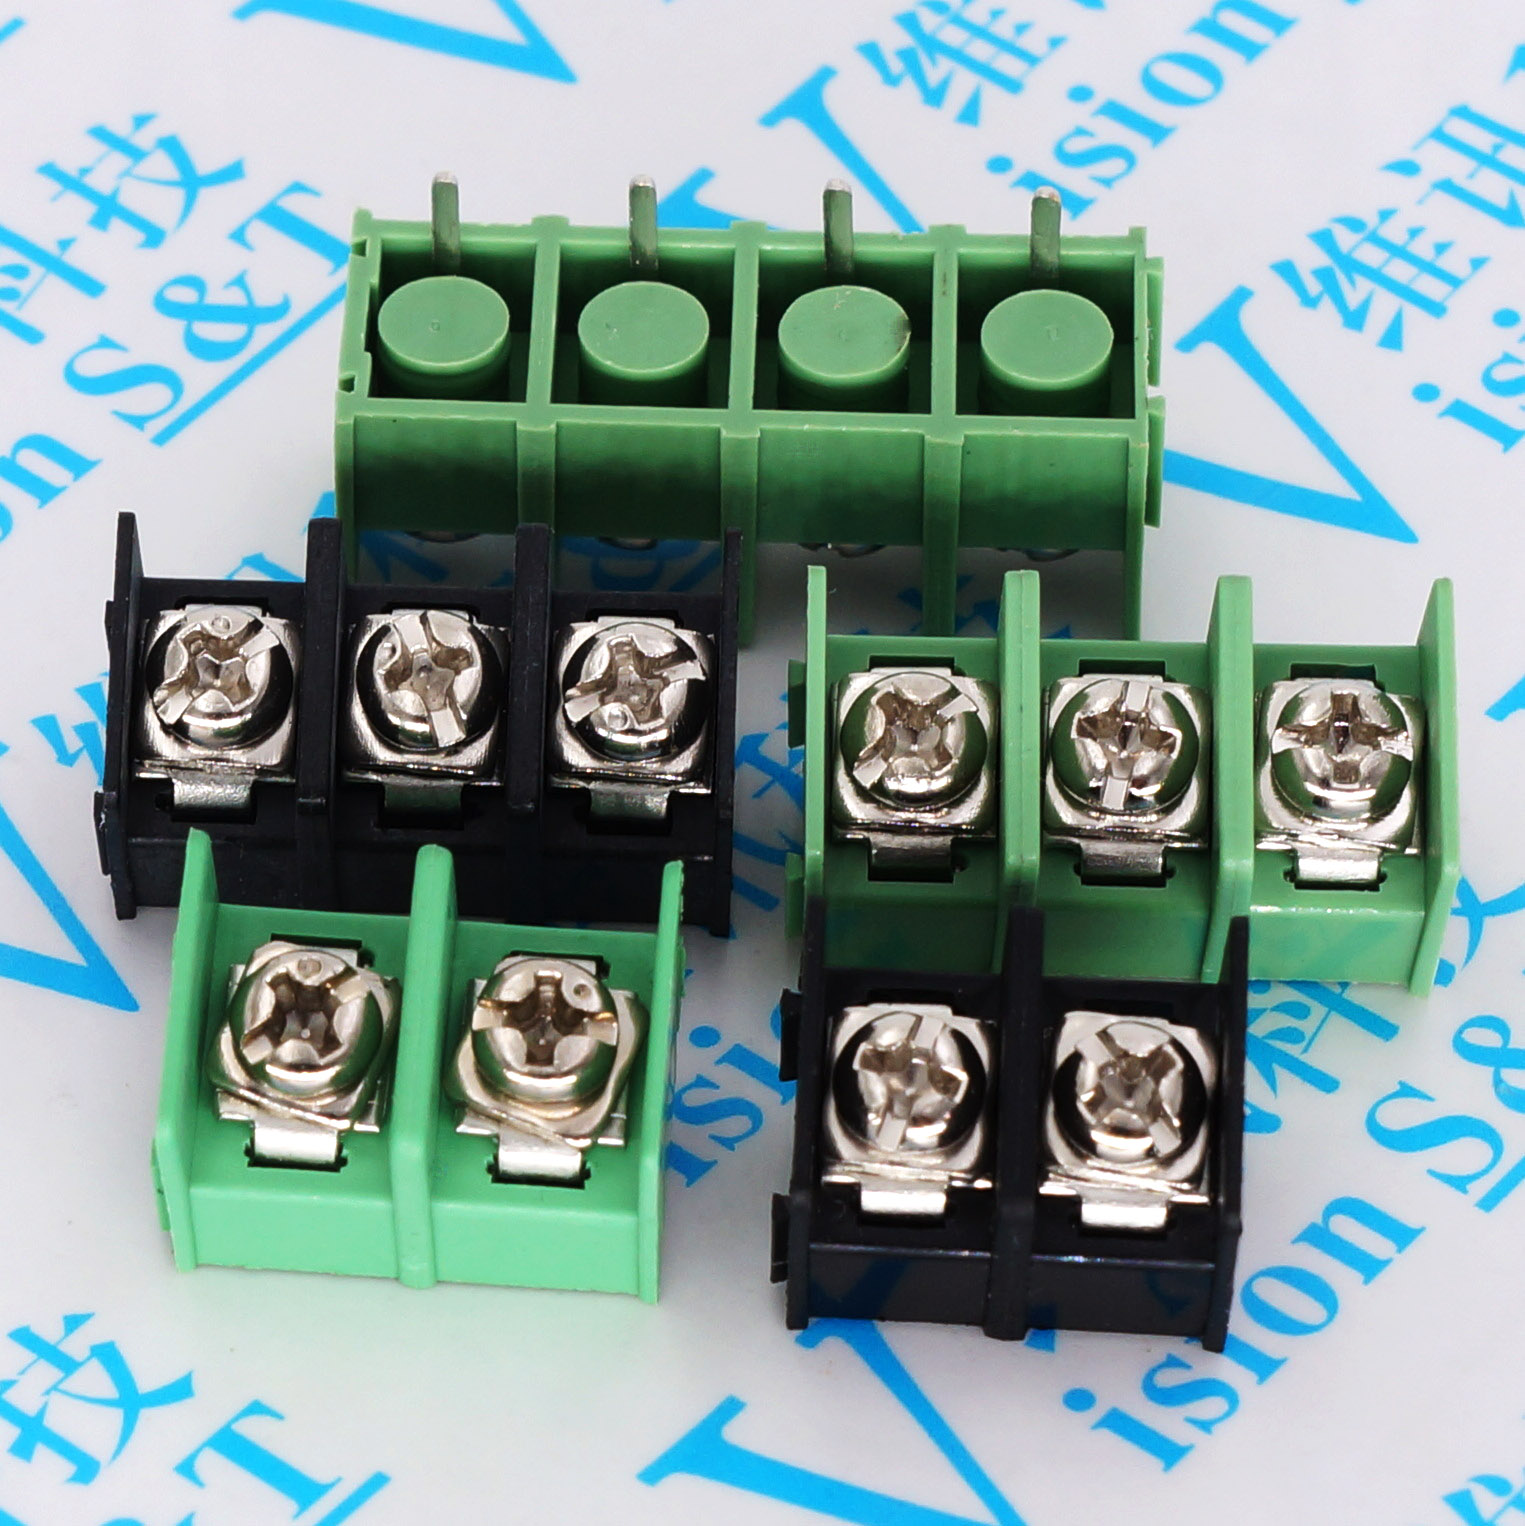 10 pcs x KF7.62mm-2/3/4Pin 300 V 20A 7.62mm Toonhoogte Rechte Naald Connector Pcb schroef Blokaansluiting